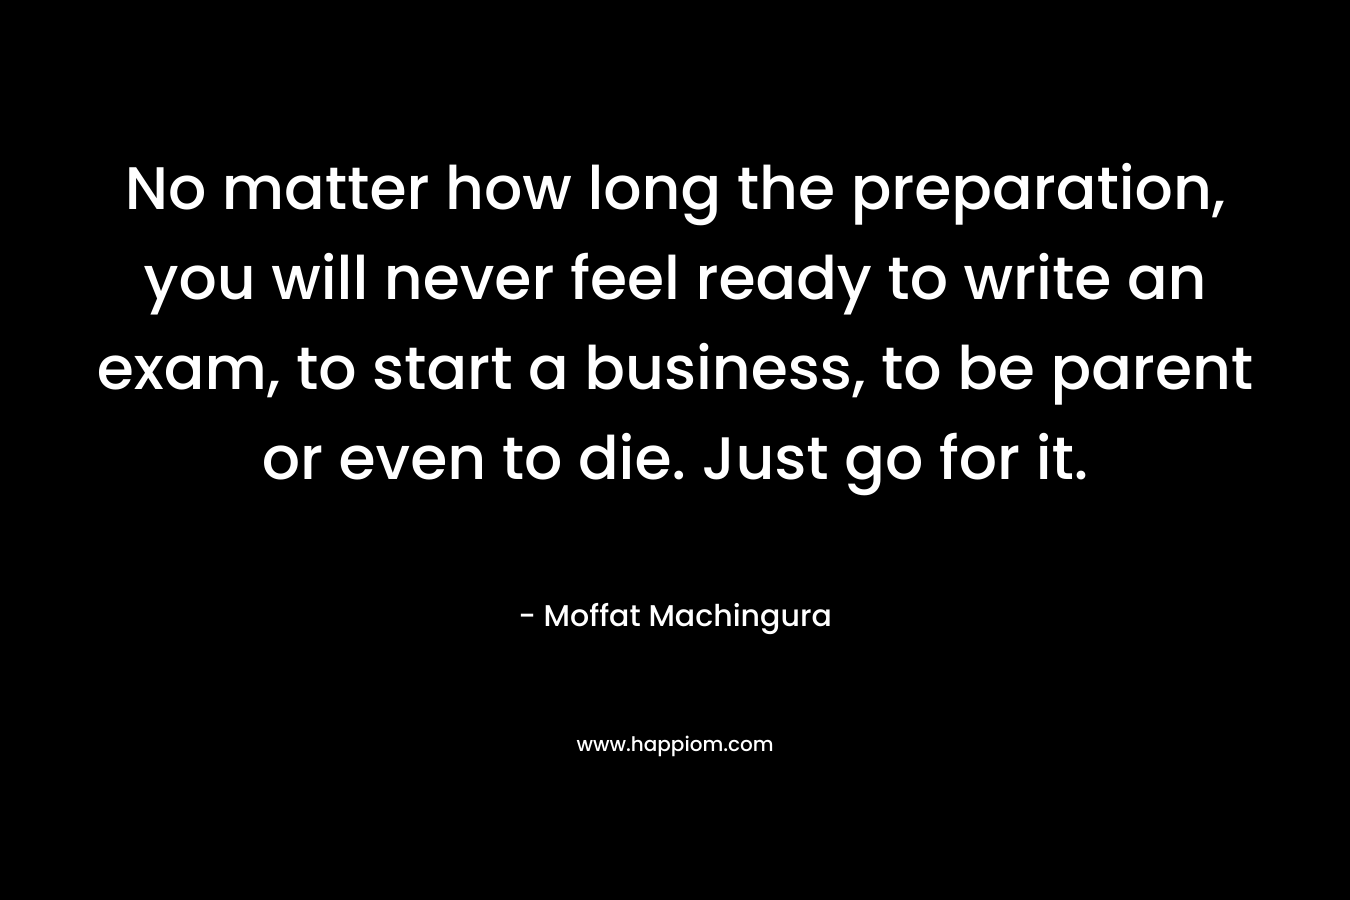 No matter how long the preparation, you will never feel ready to write an exam, to start a business, to be parent or even to die. Just go for it.